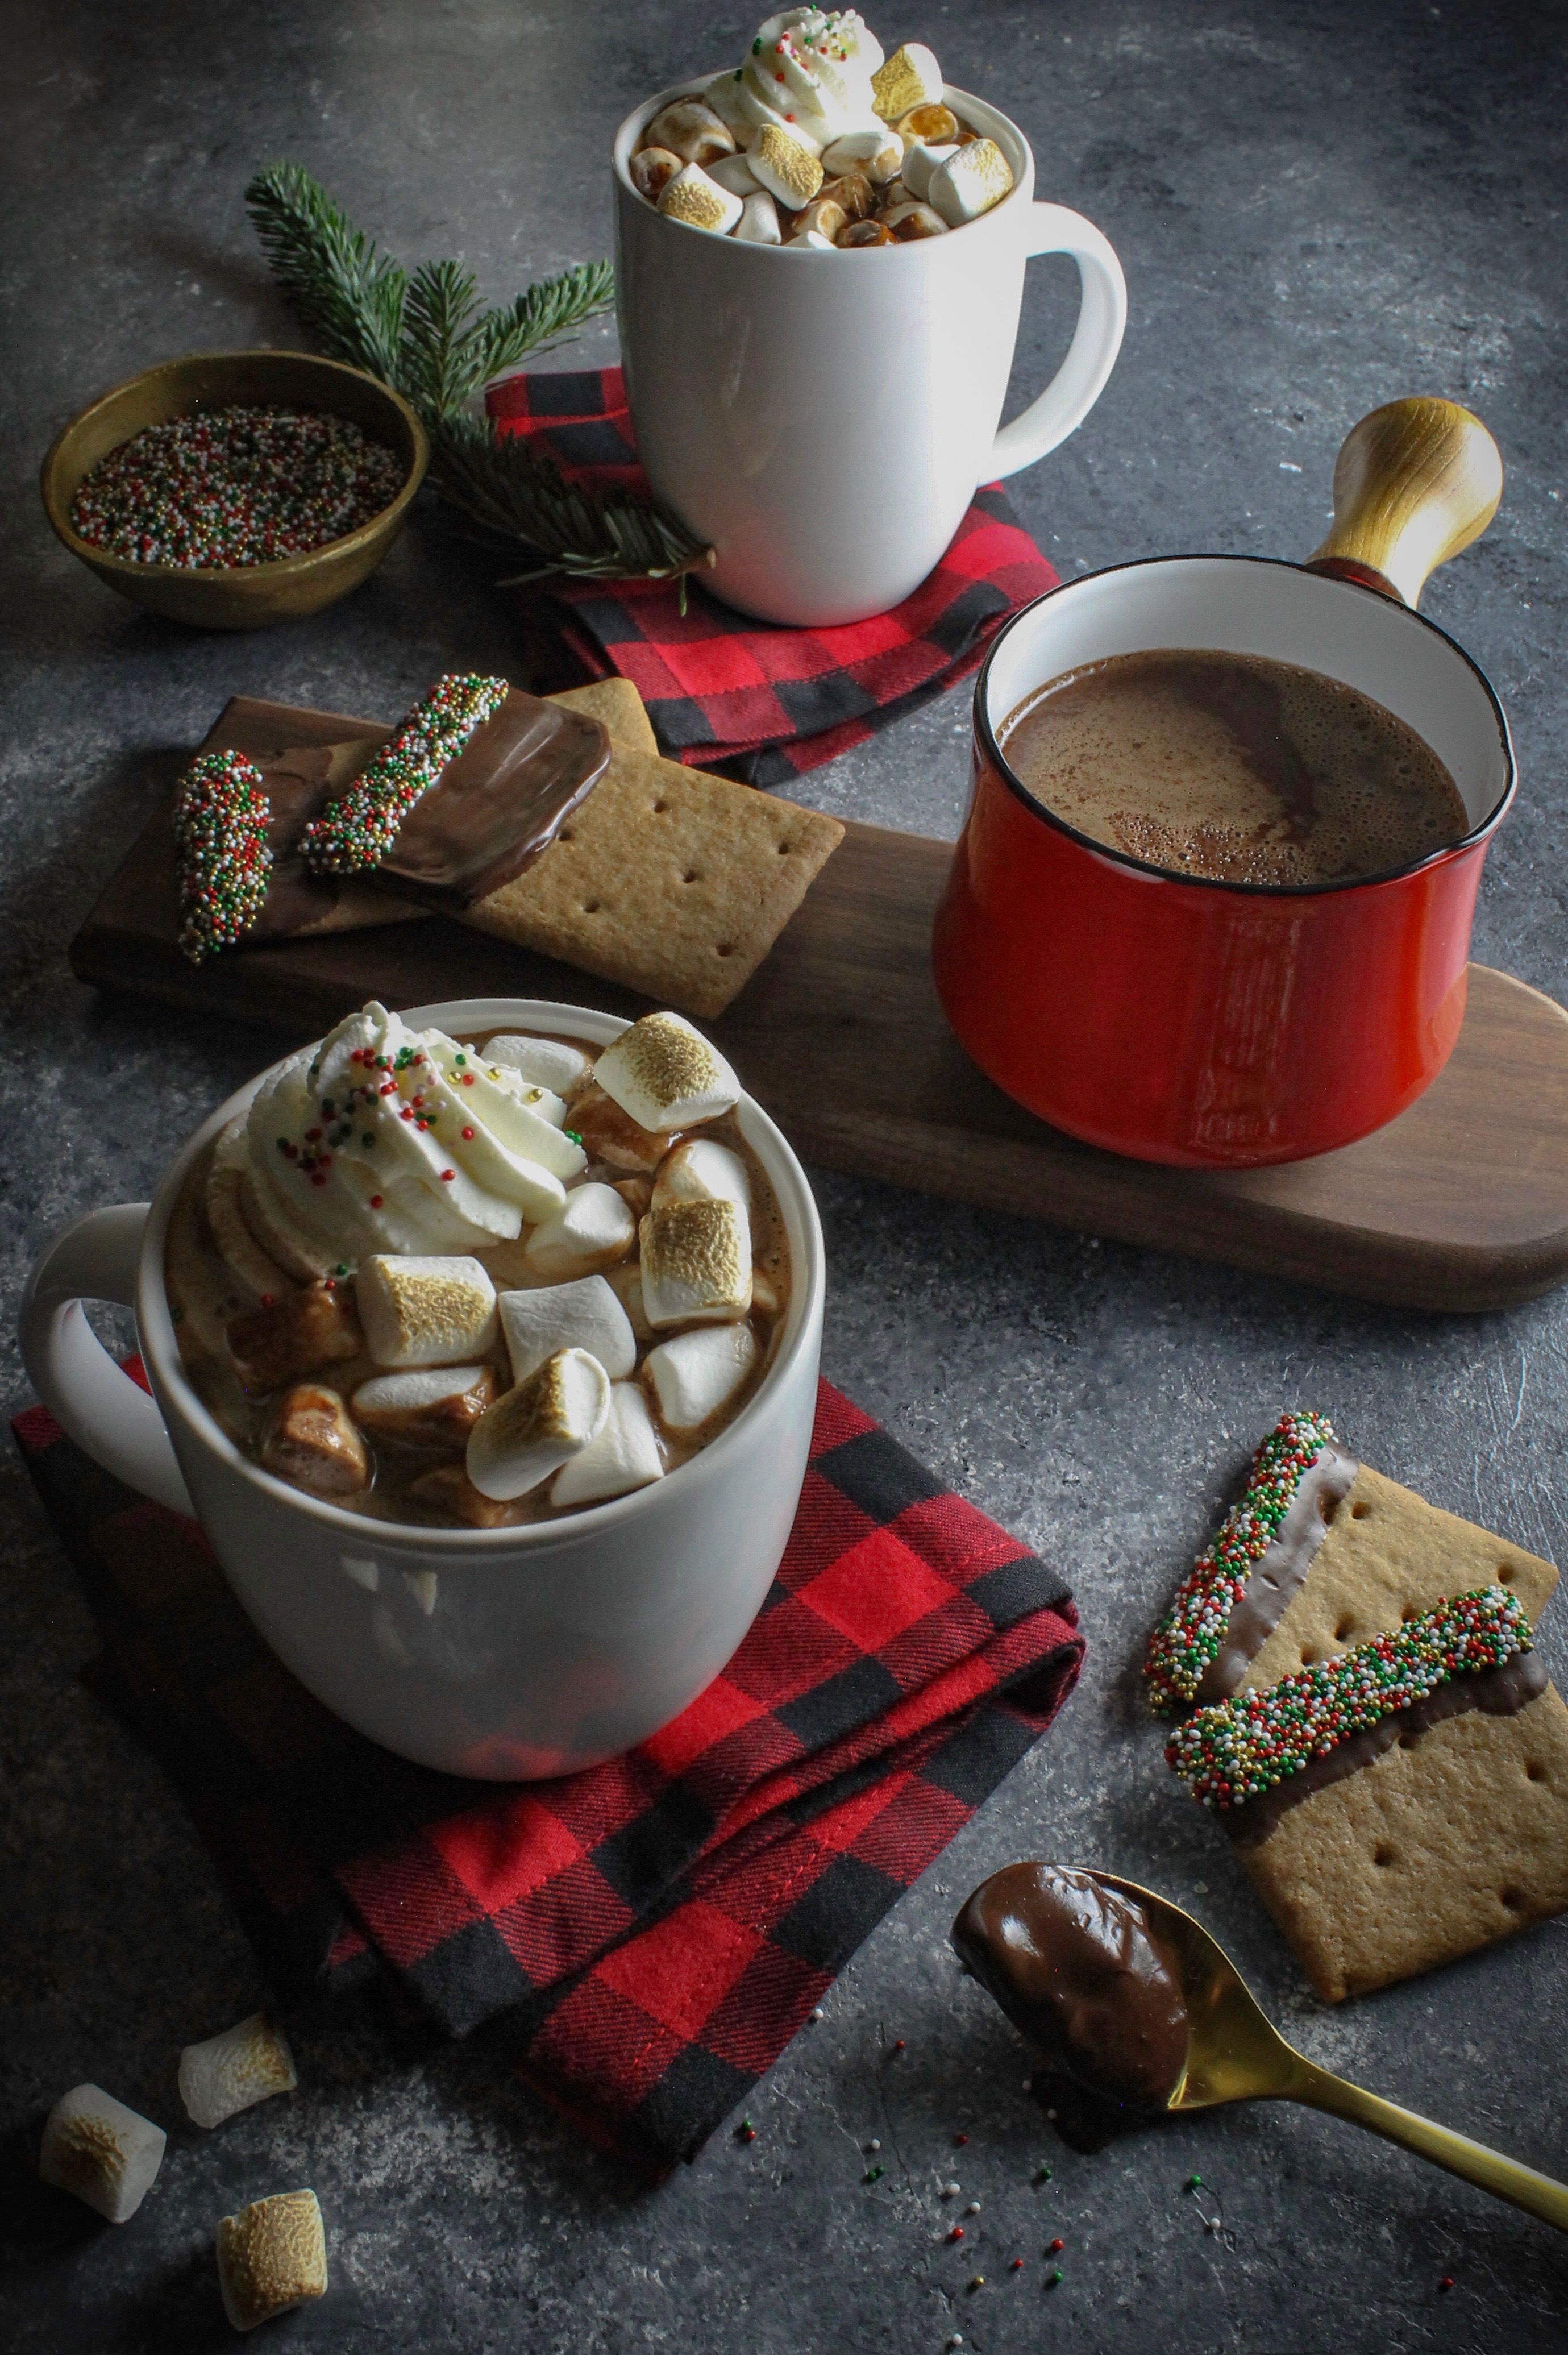 Glasses of hot chocolate with whipped cream, roasted marshmallows and Christmas sprinkles.